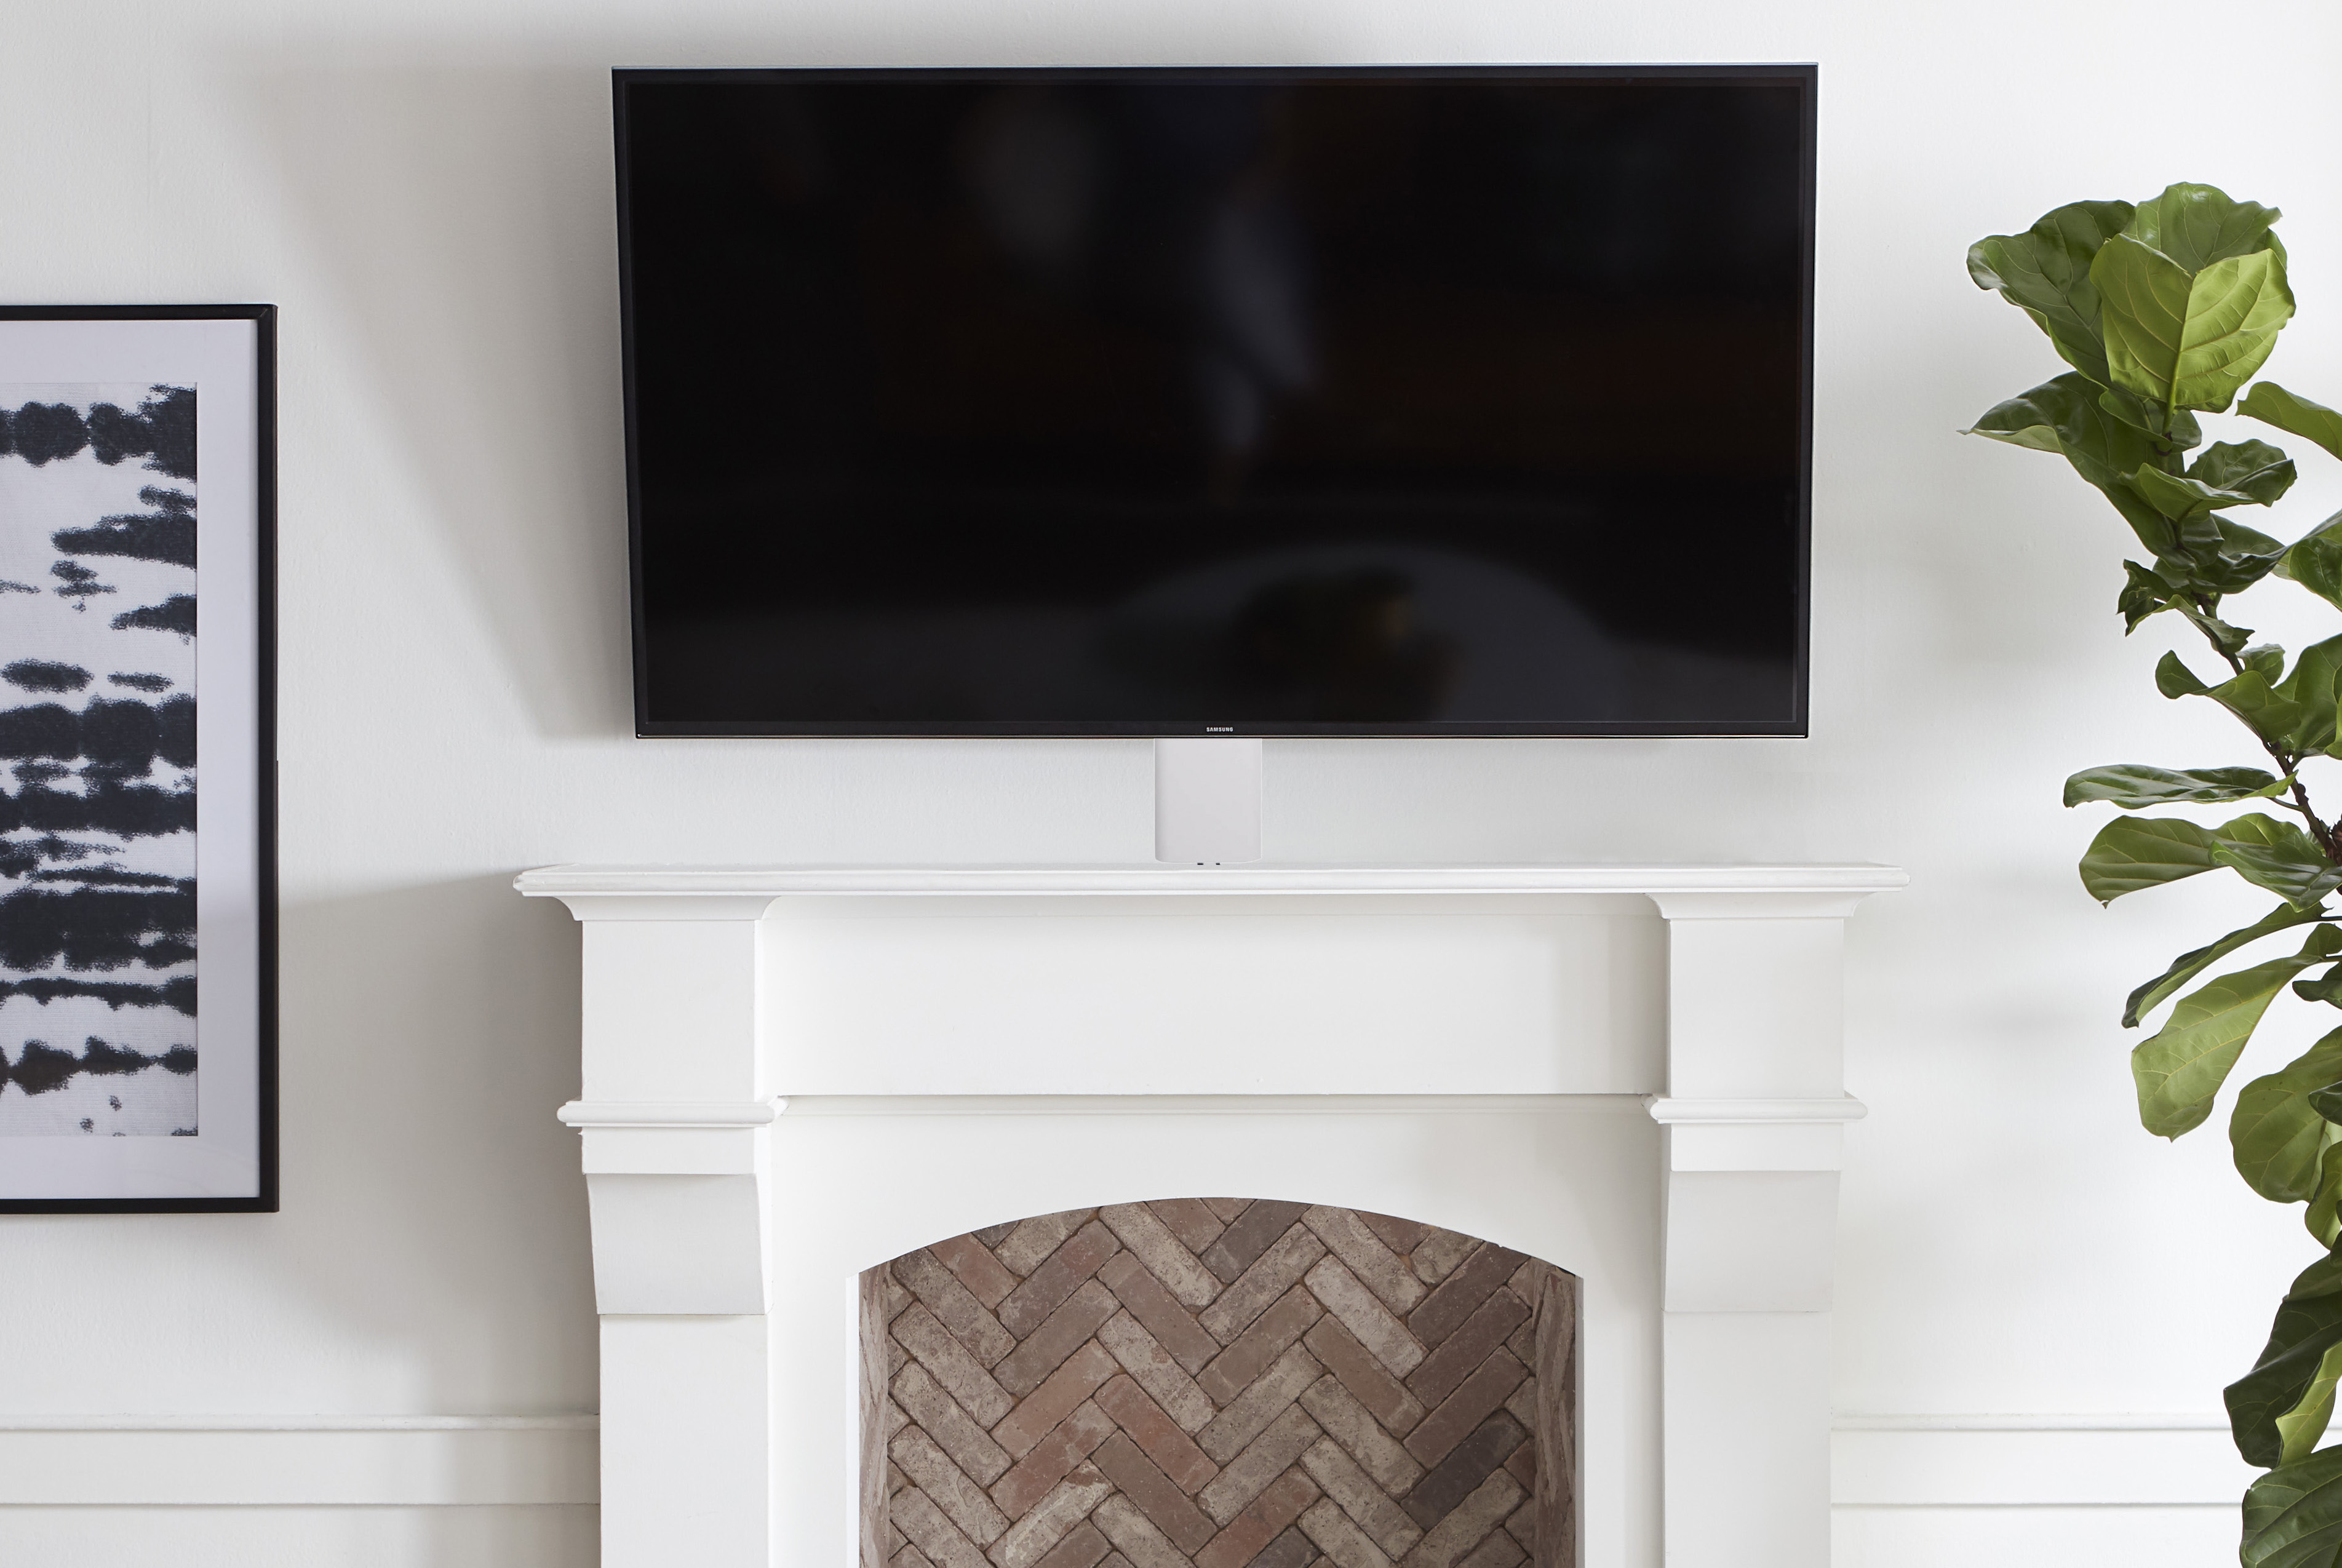 Mounting A Tv Over Fireplace How, How To Install Flat Screen Tv Above Fireplace